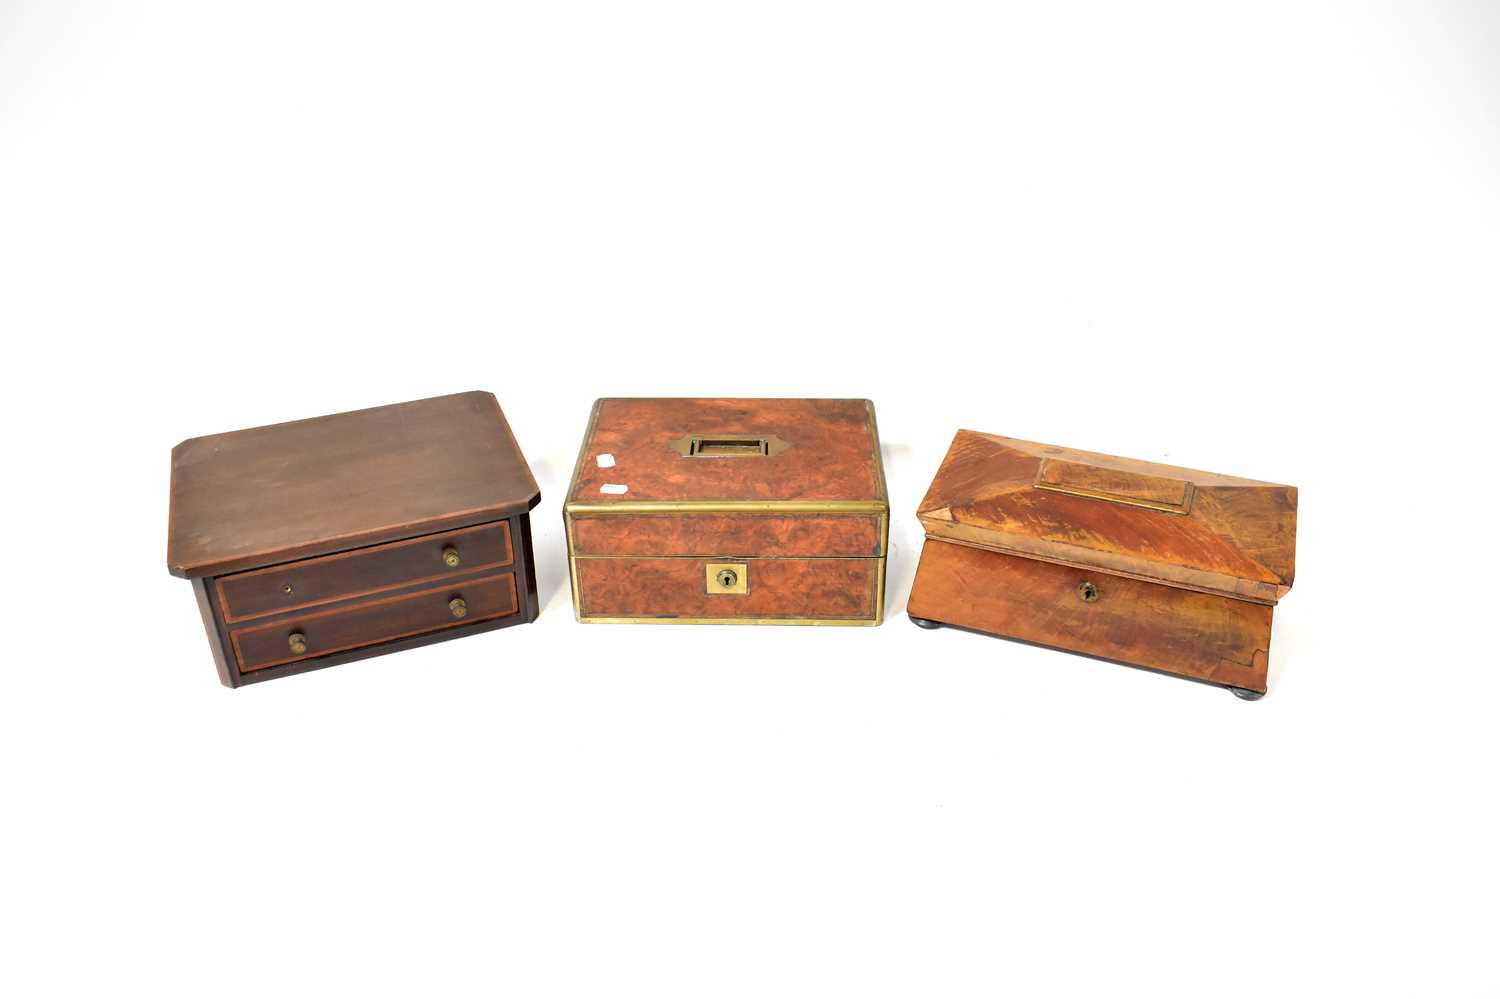 A walnut brass bound jewellery and sewing case with lift-out lid, with one original glass-topped